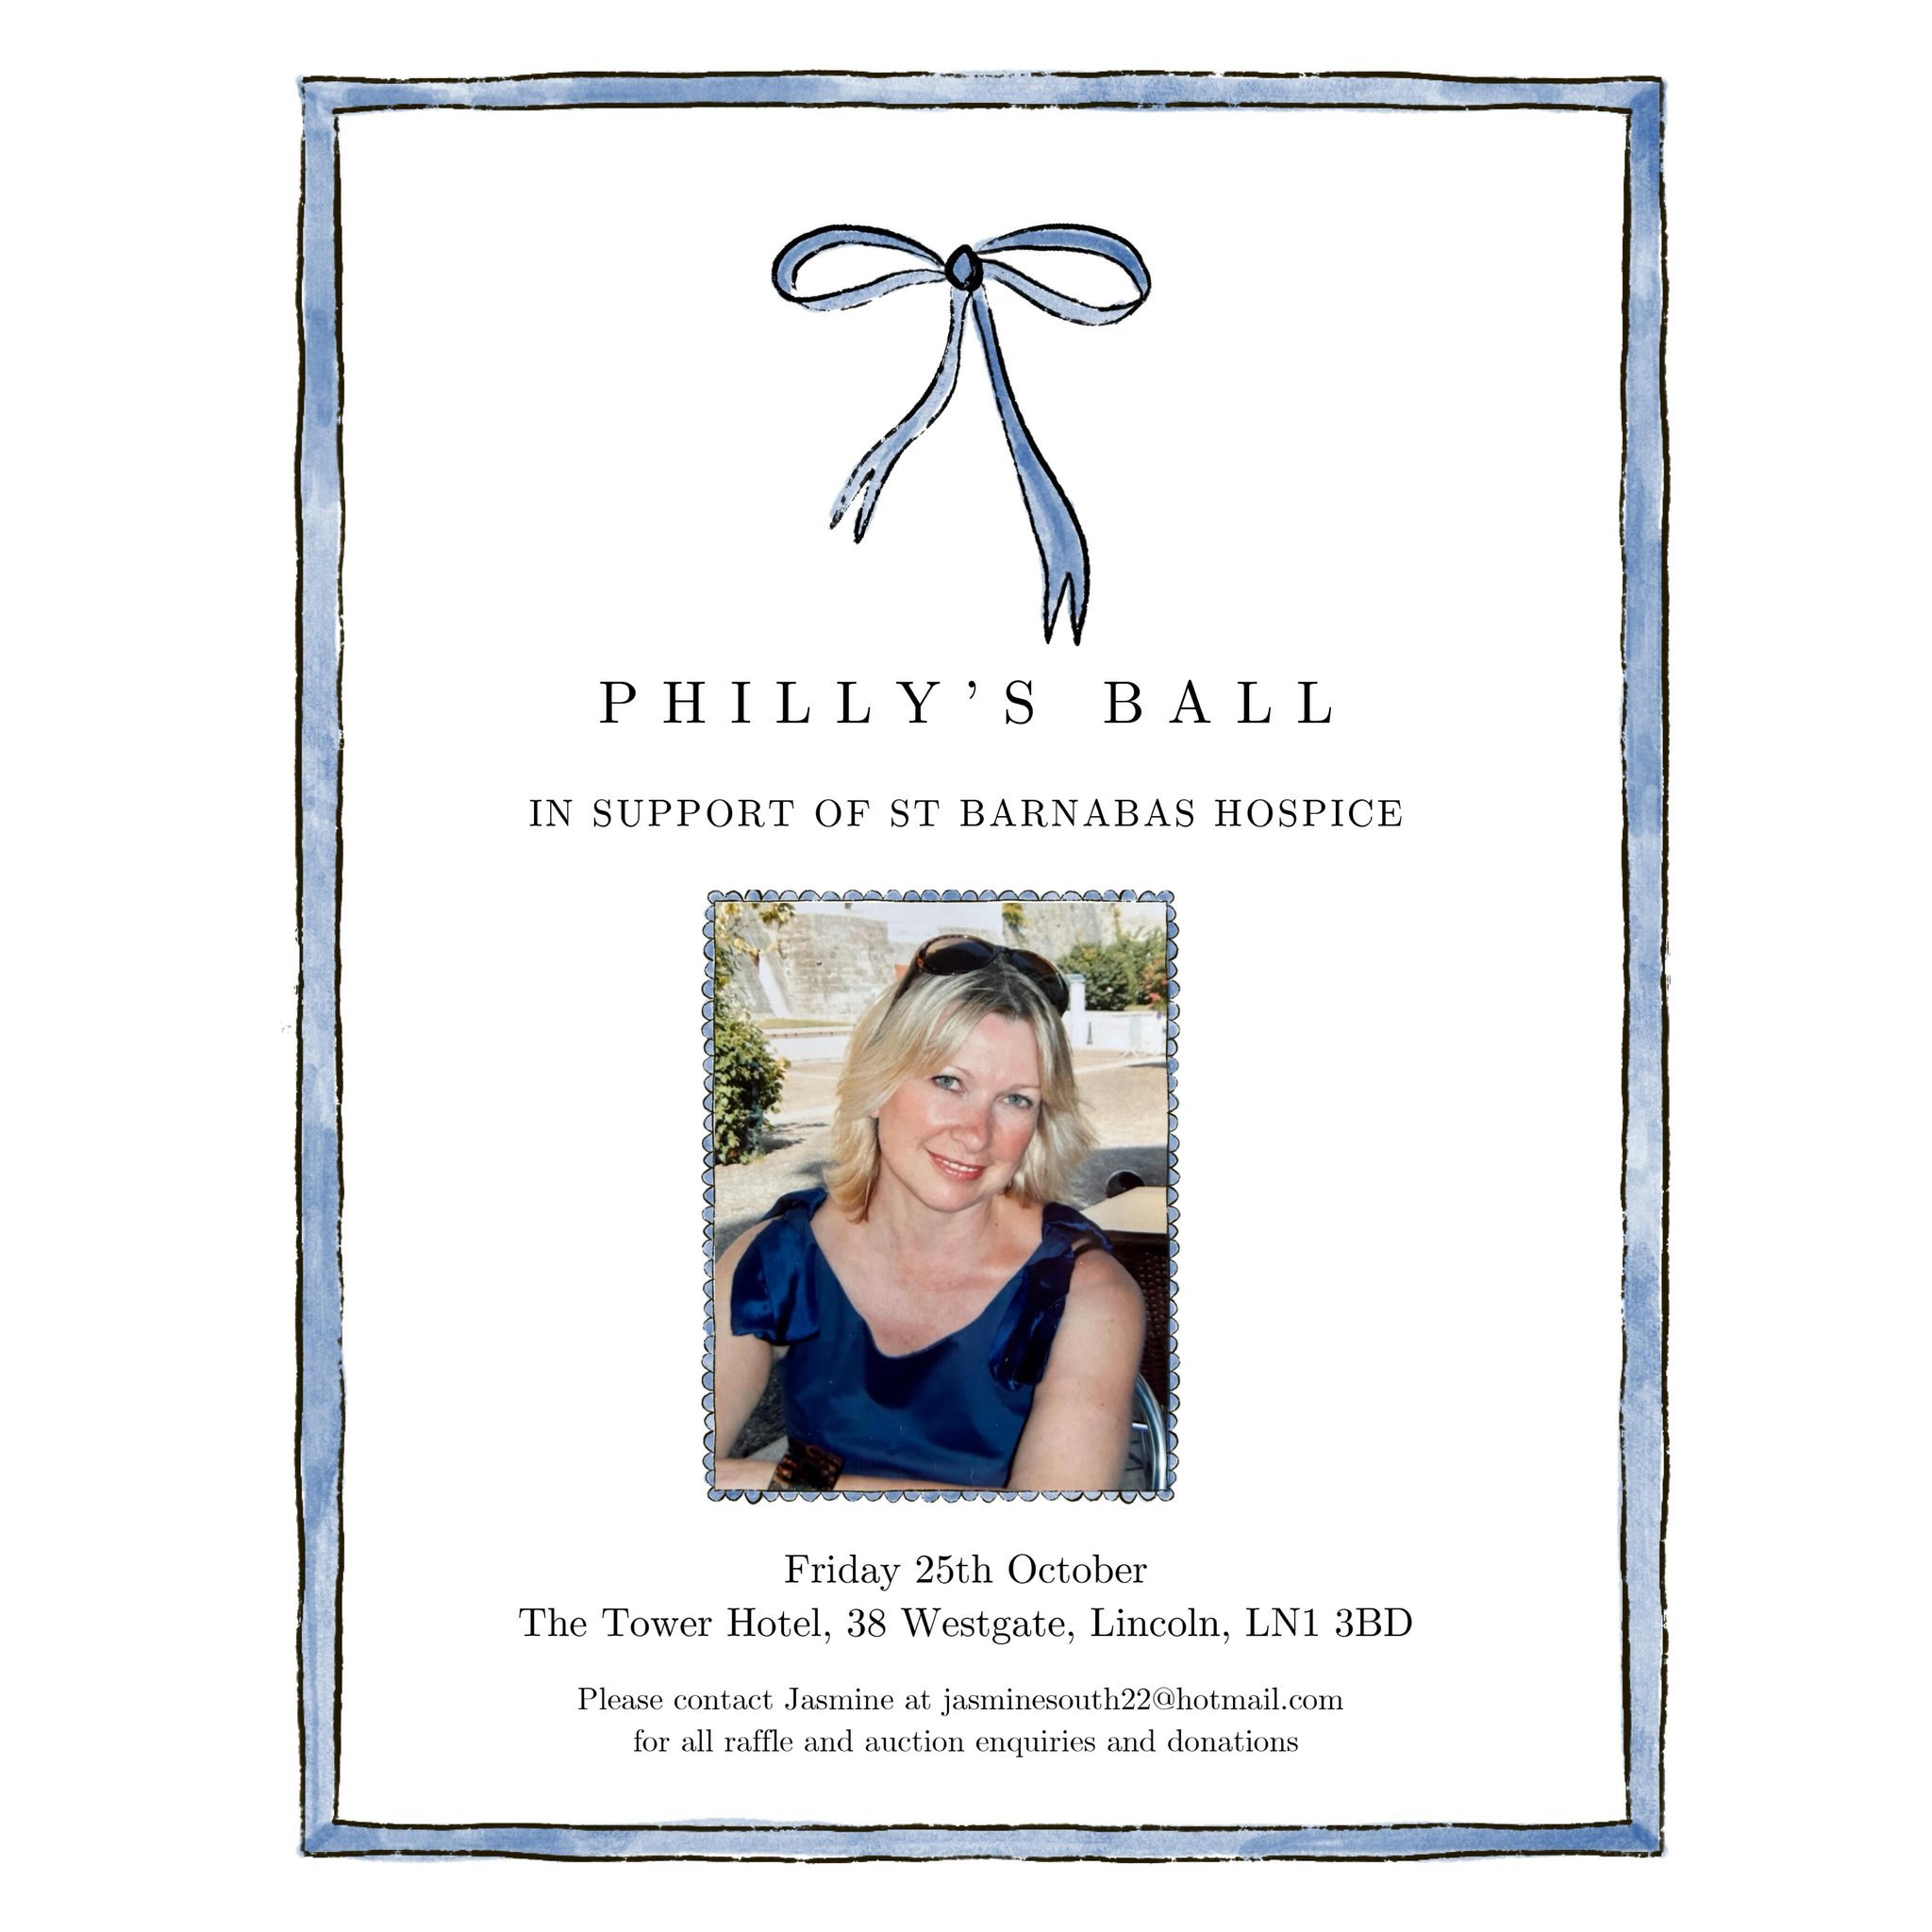 We&rsquo;re on the hunt for raffle and auction prizes for our @stbarnabashospice Ball in memory of our founder, Philly. We&rsquo;d appreciate any help in supplying prizes that will go towards an incredible cause ✨💙

If you have something you&rsquo;d